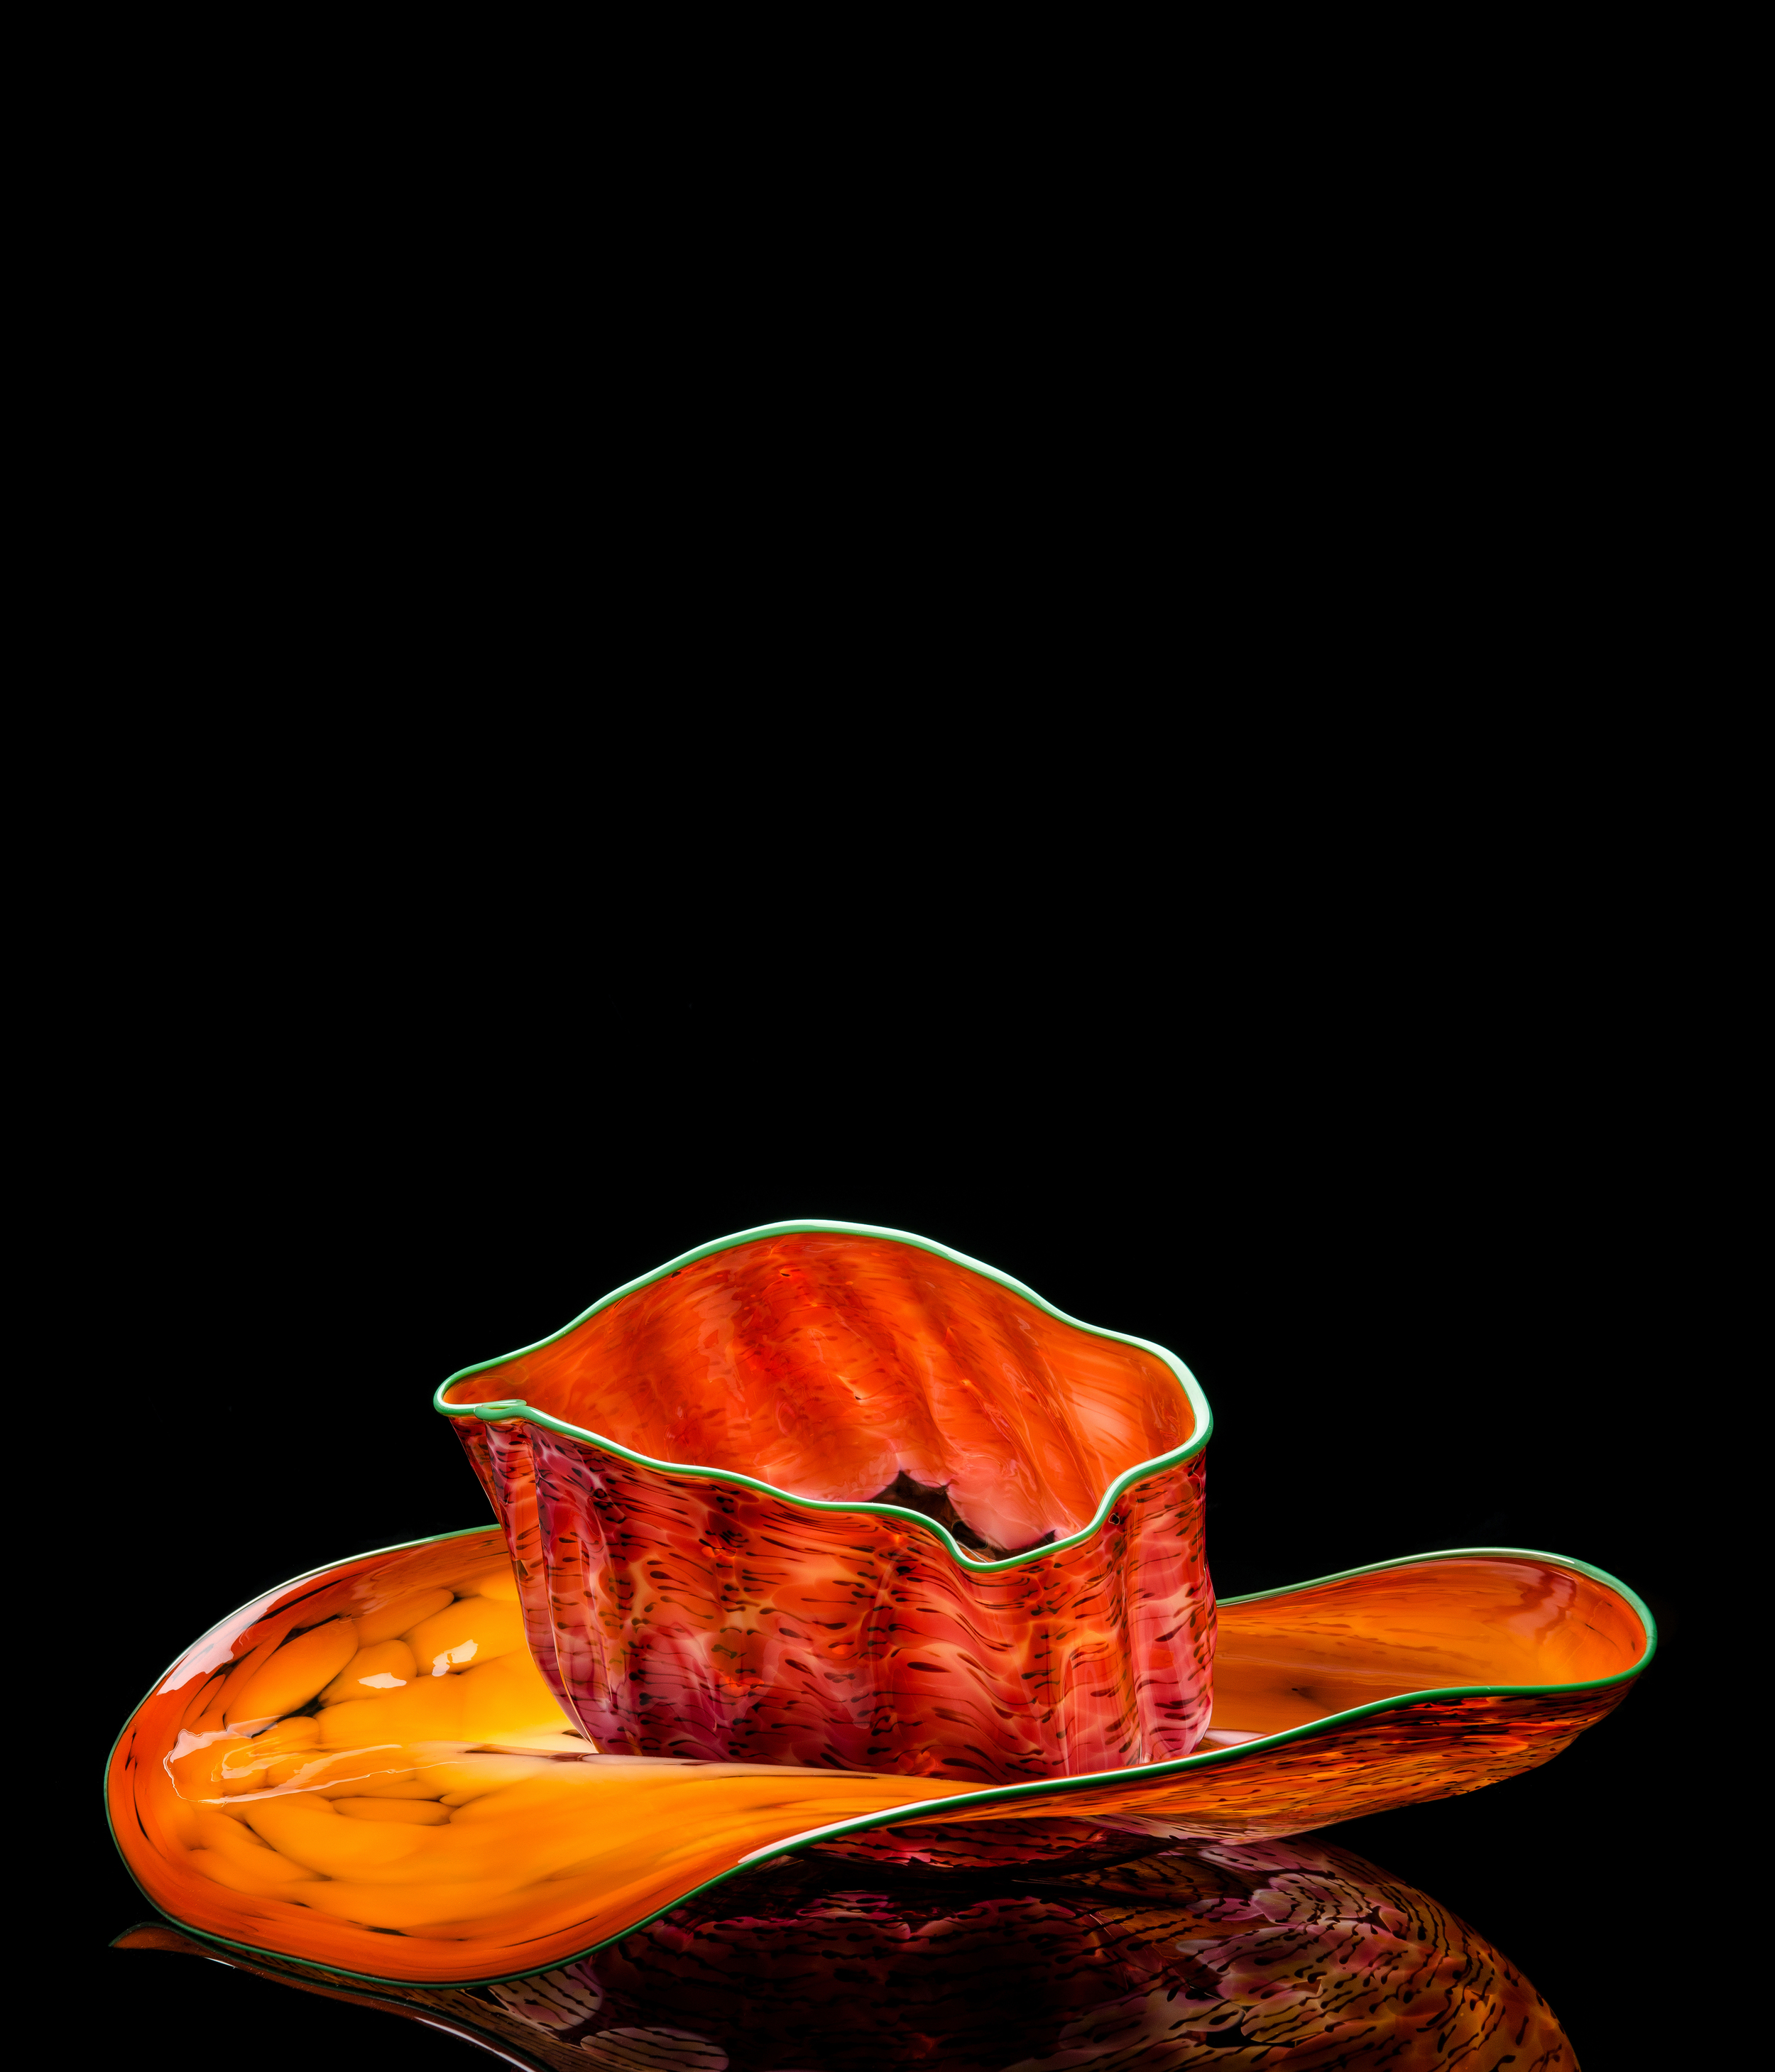  Dale Chihuly,&nbsp; Butterscotch Set with Teal Lip Wrap&nbsp; (1986, glass, approximately 18 x 30 x 30 inches), DC.143 